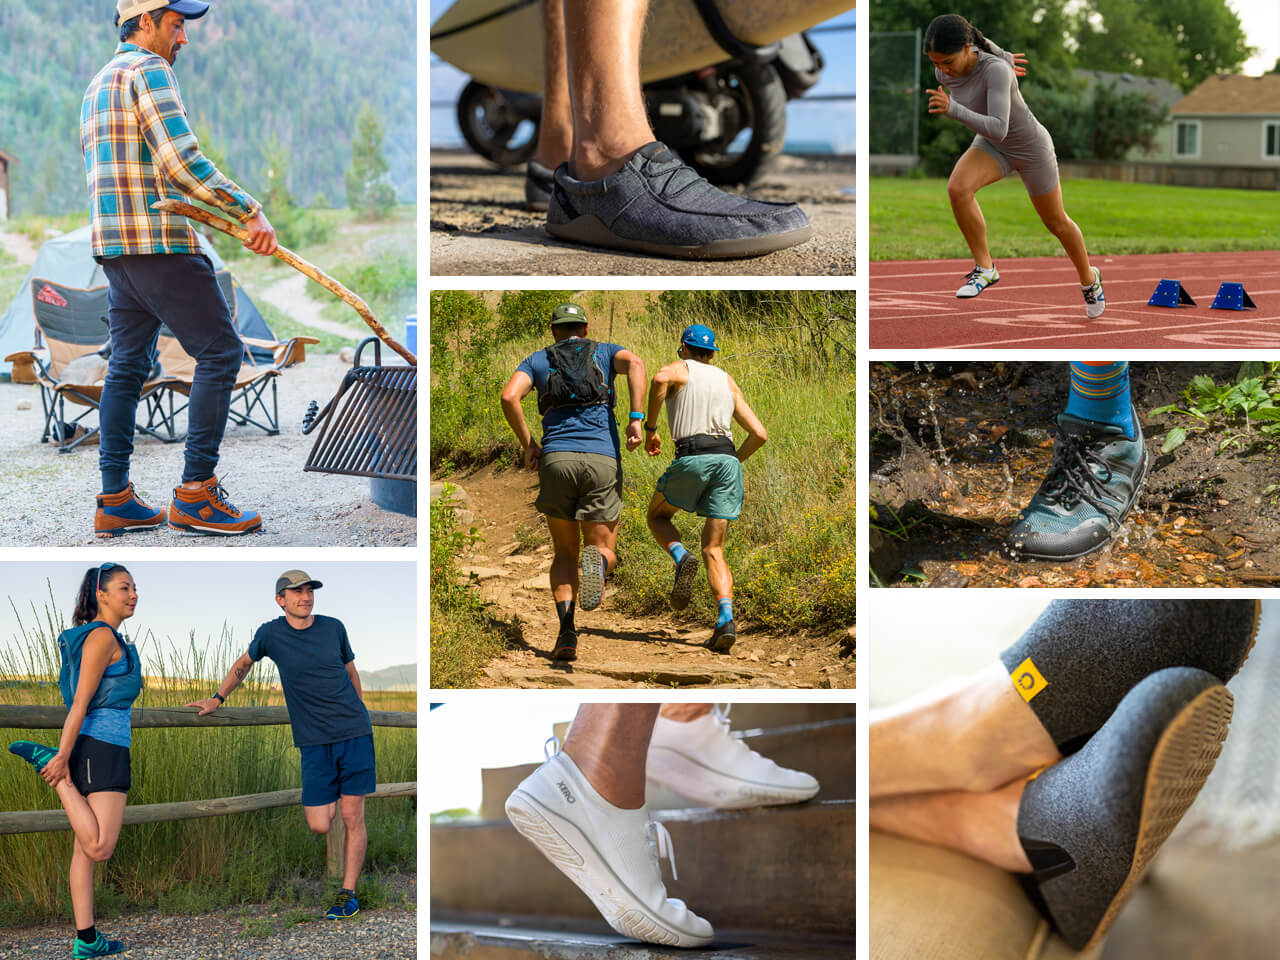 Xero Shoes Launches New Barefoot Shoes for Running, Hiking and Casual Wear  - Xero Shoes